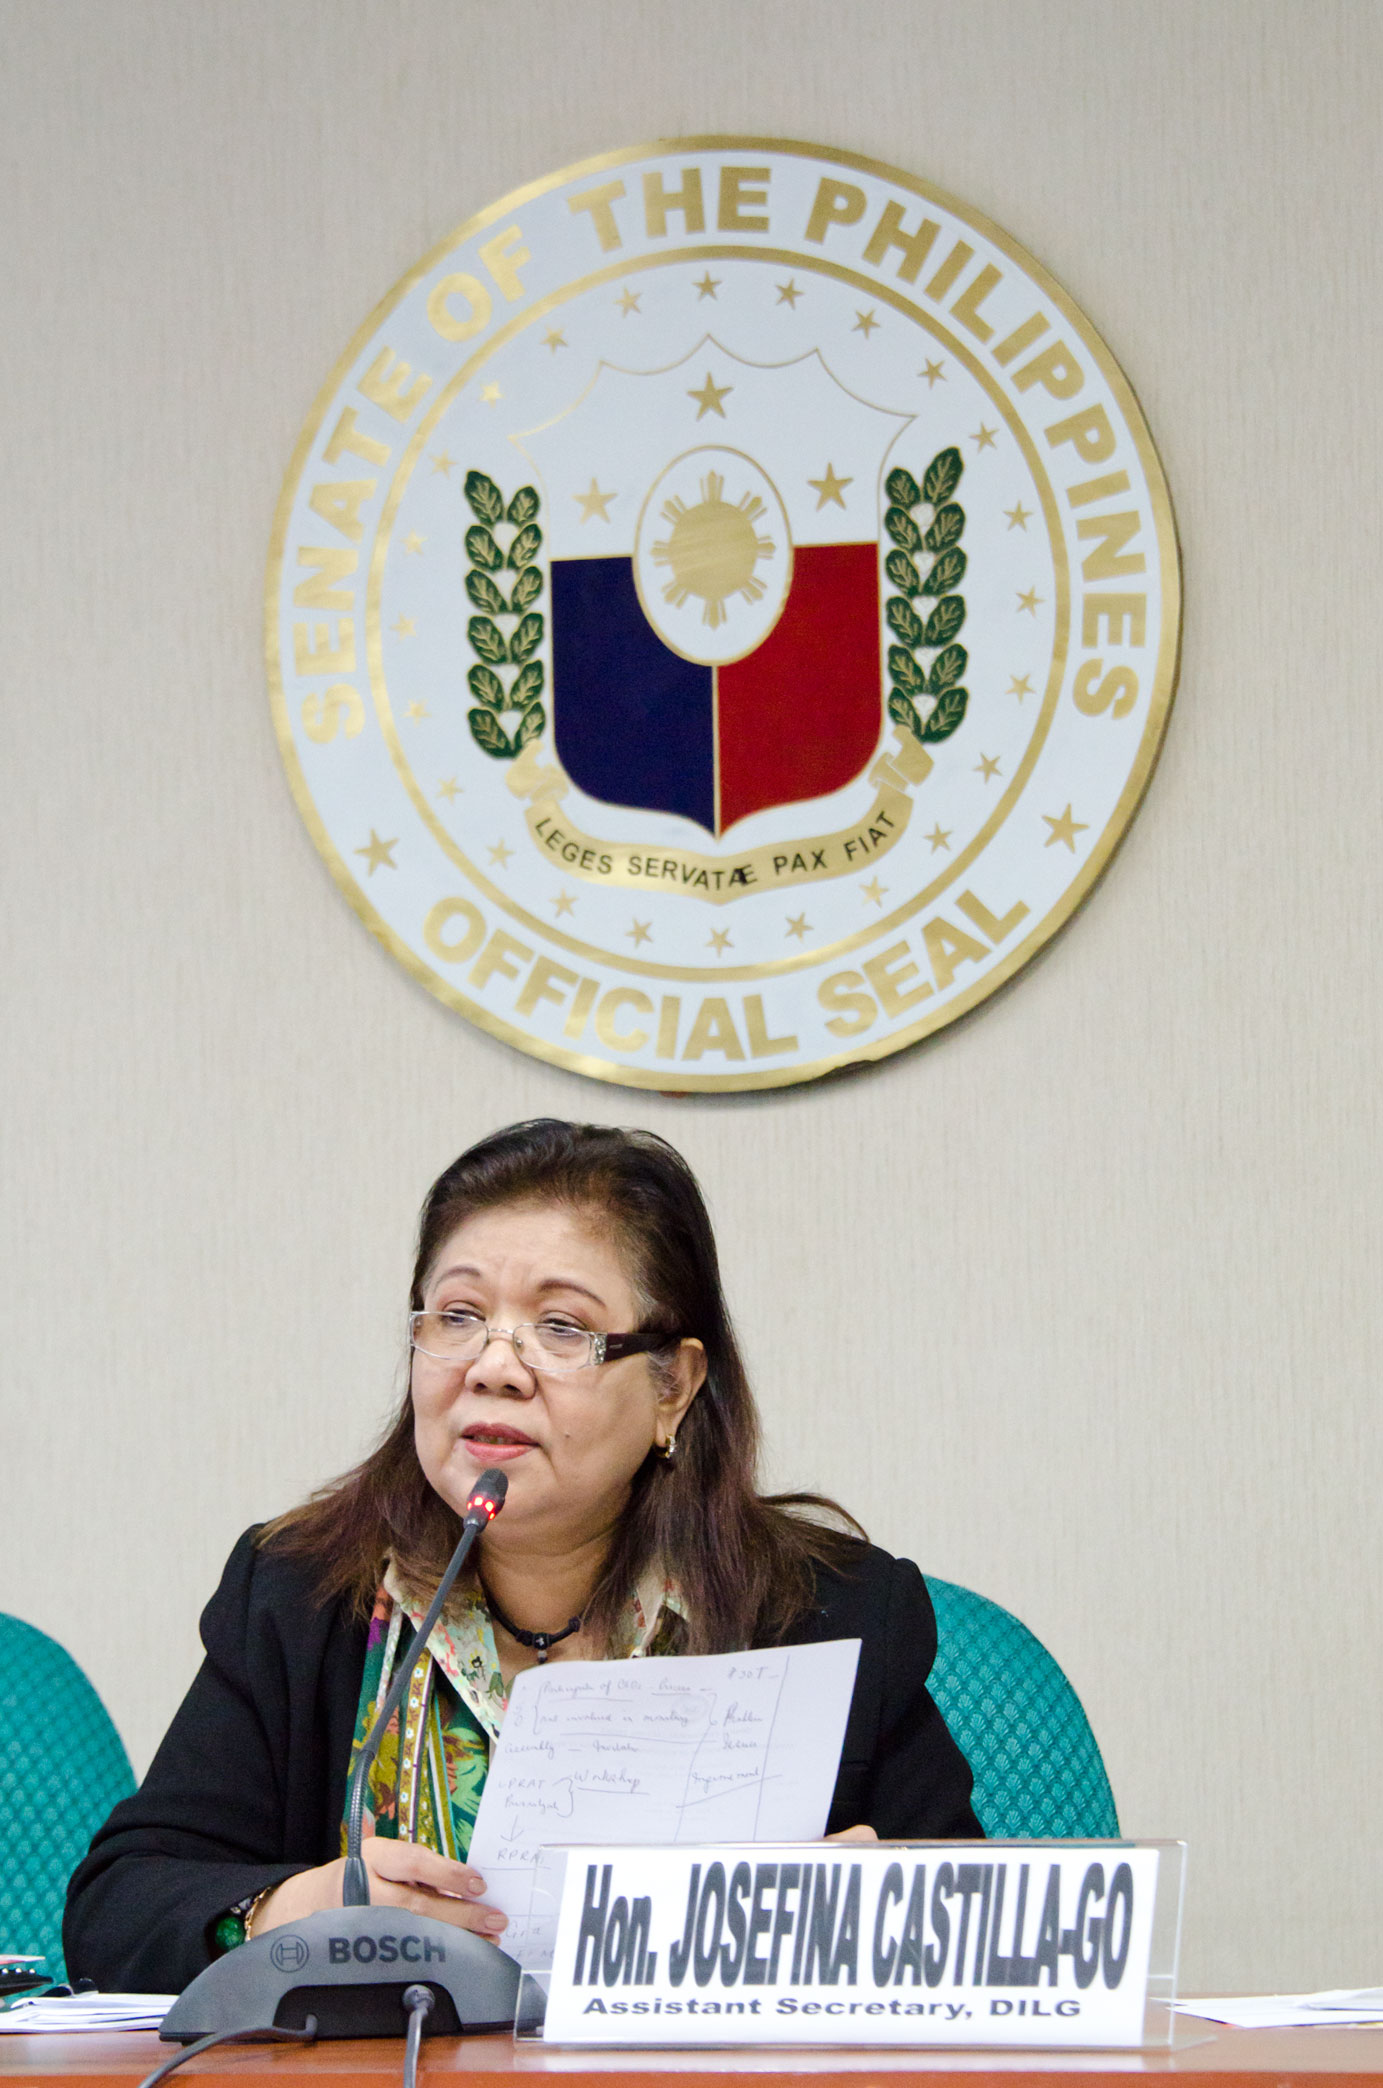 Senate Centennial Lecture Series Assessment Of The Bottom-Up Budgeting Process For FY 2015-GGM_8018.jpg